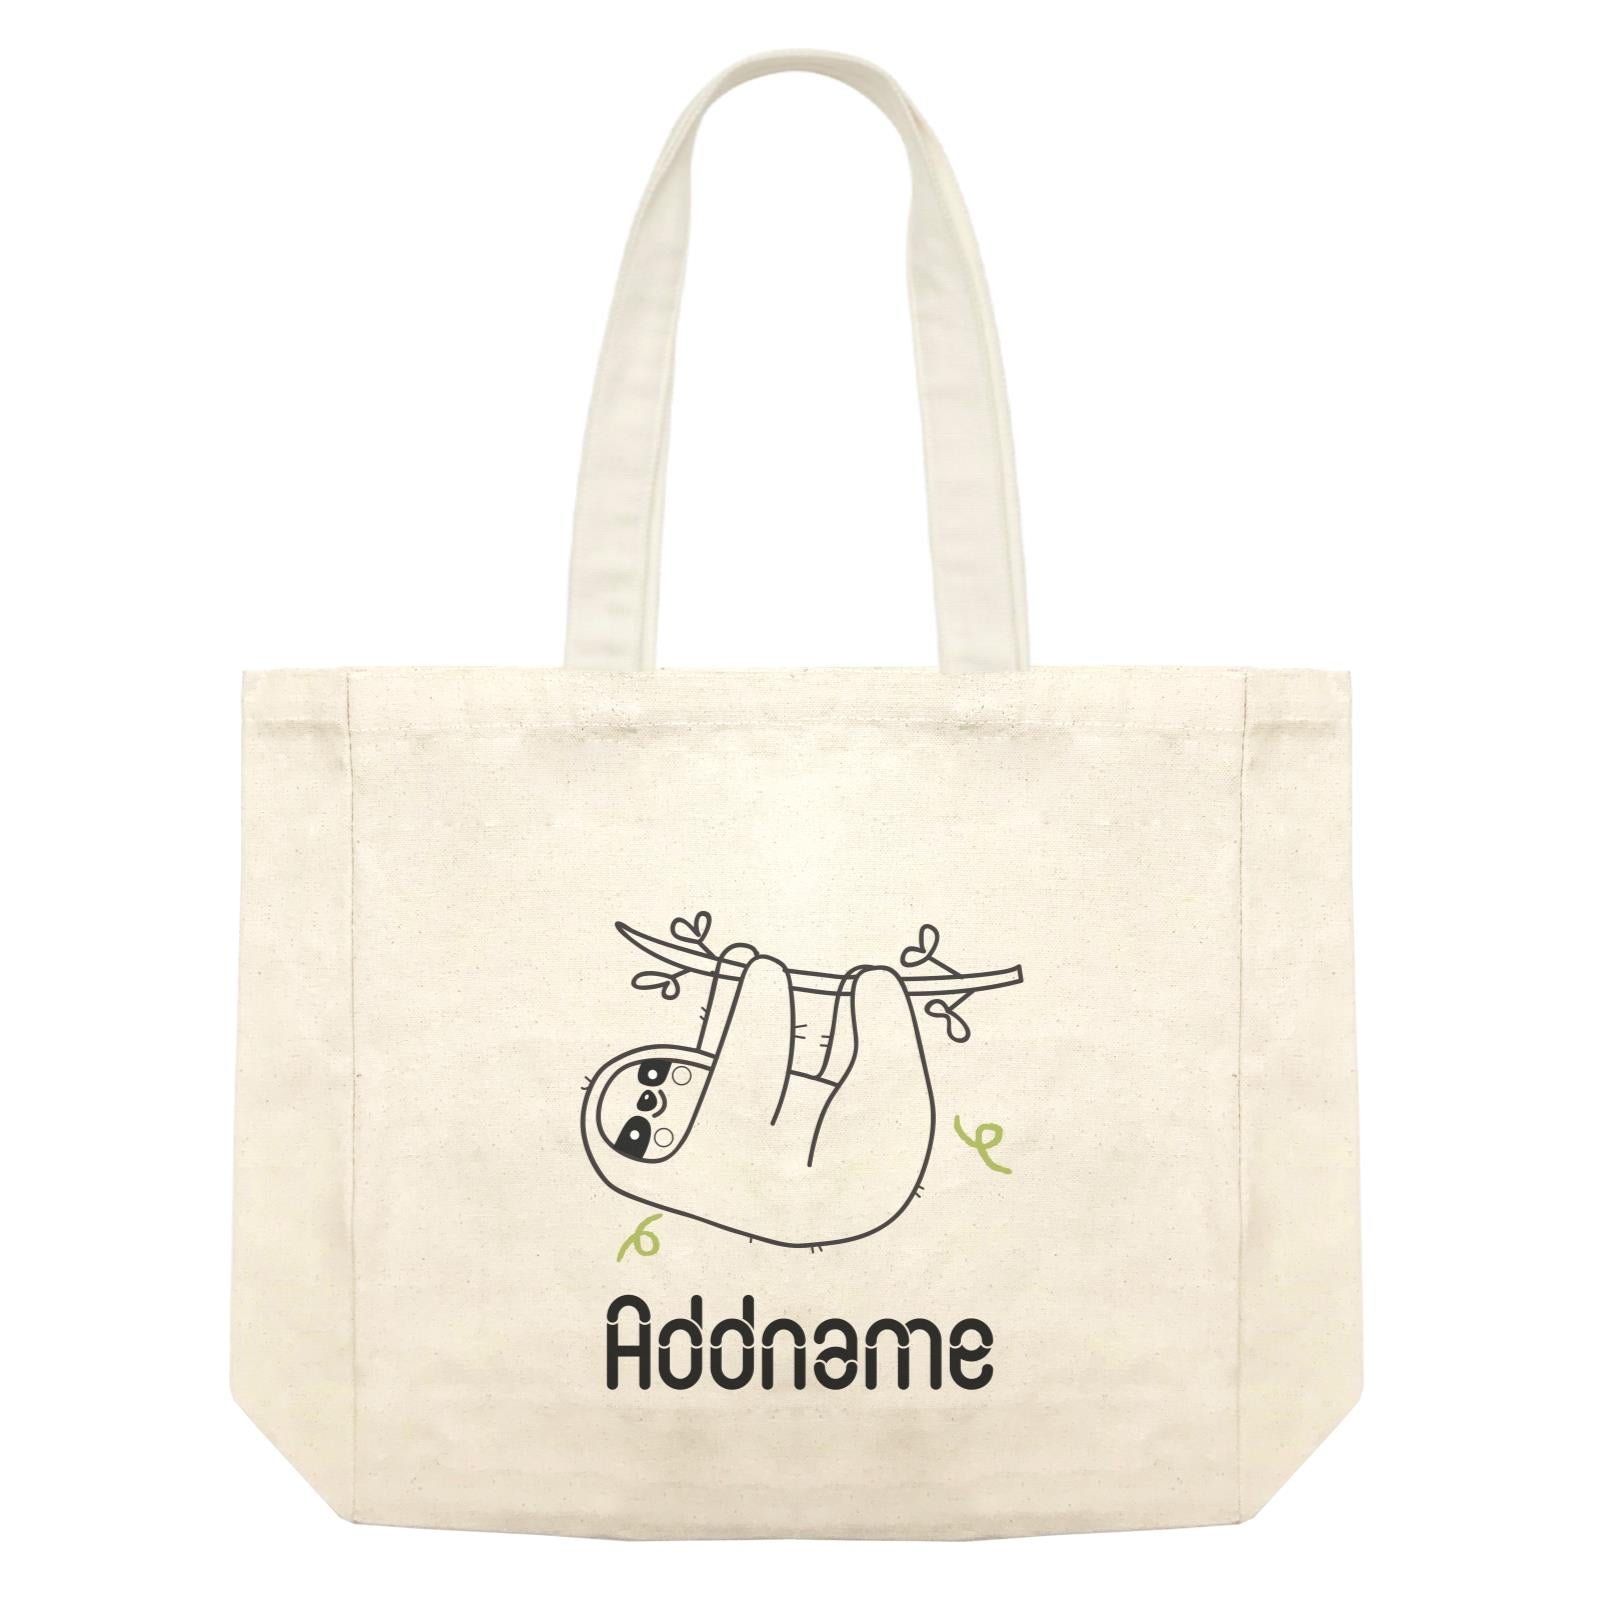 Coloring Outline Cute Hand Drawn Animals Furry Hanging Sloth Addname Shopping Bag